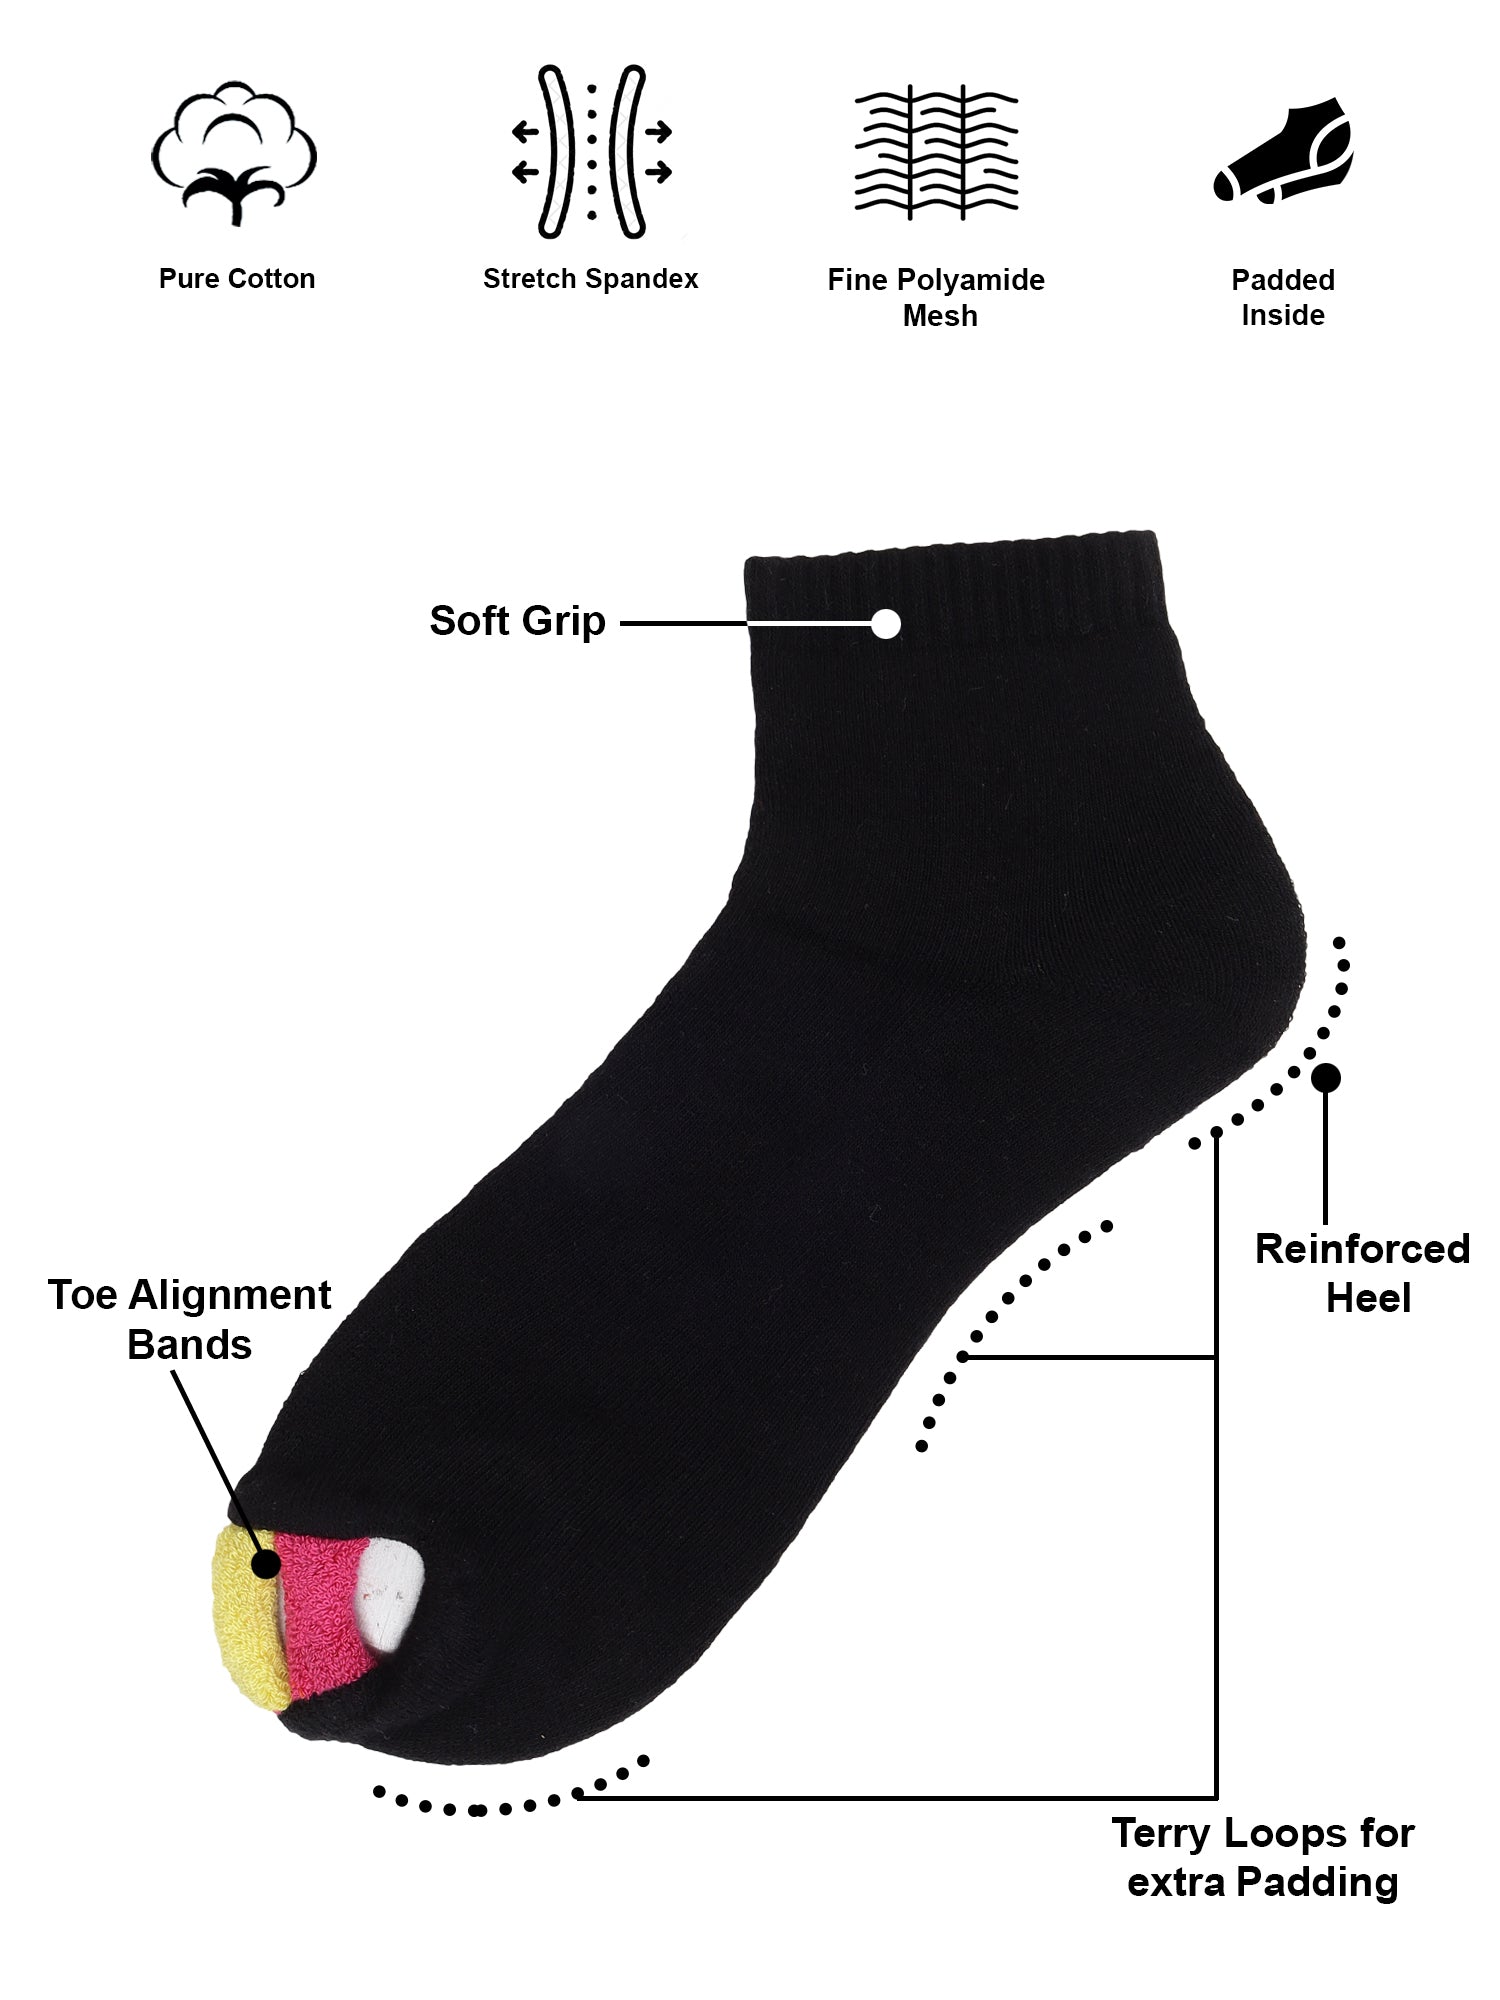 45 Different Types Of Socks Complete List & Photos - SOXWOW